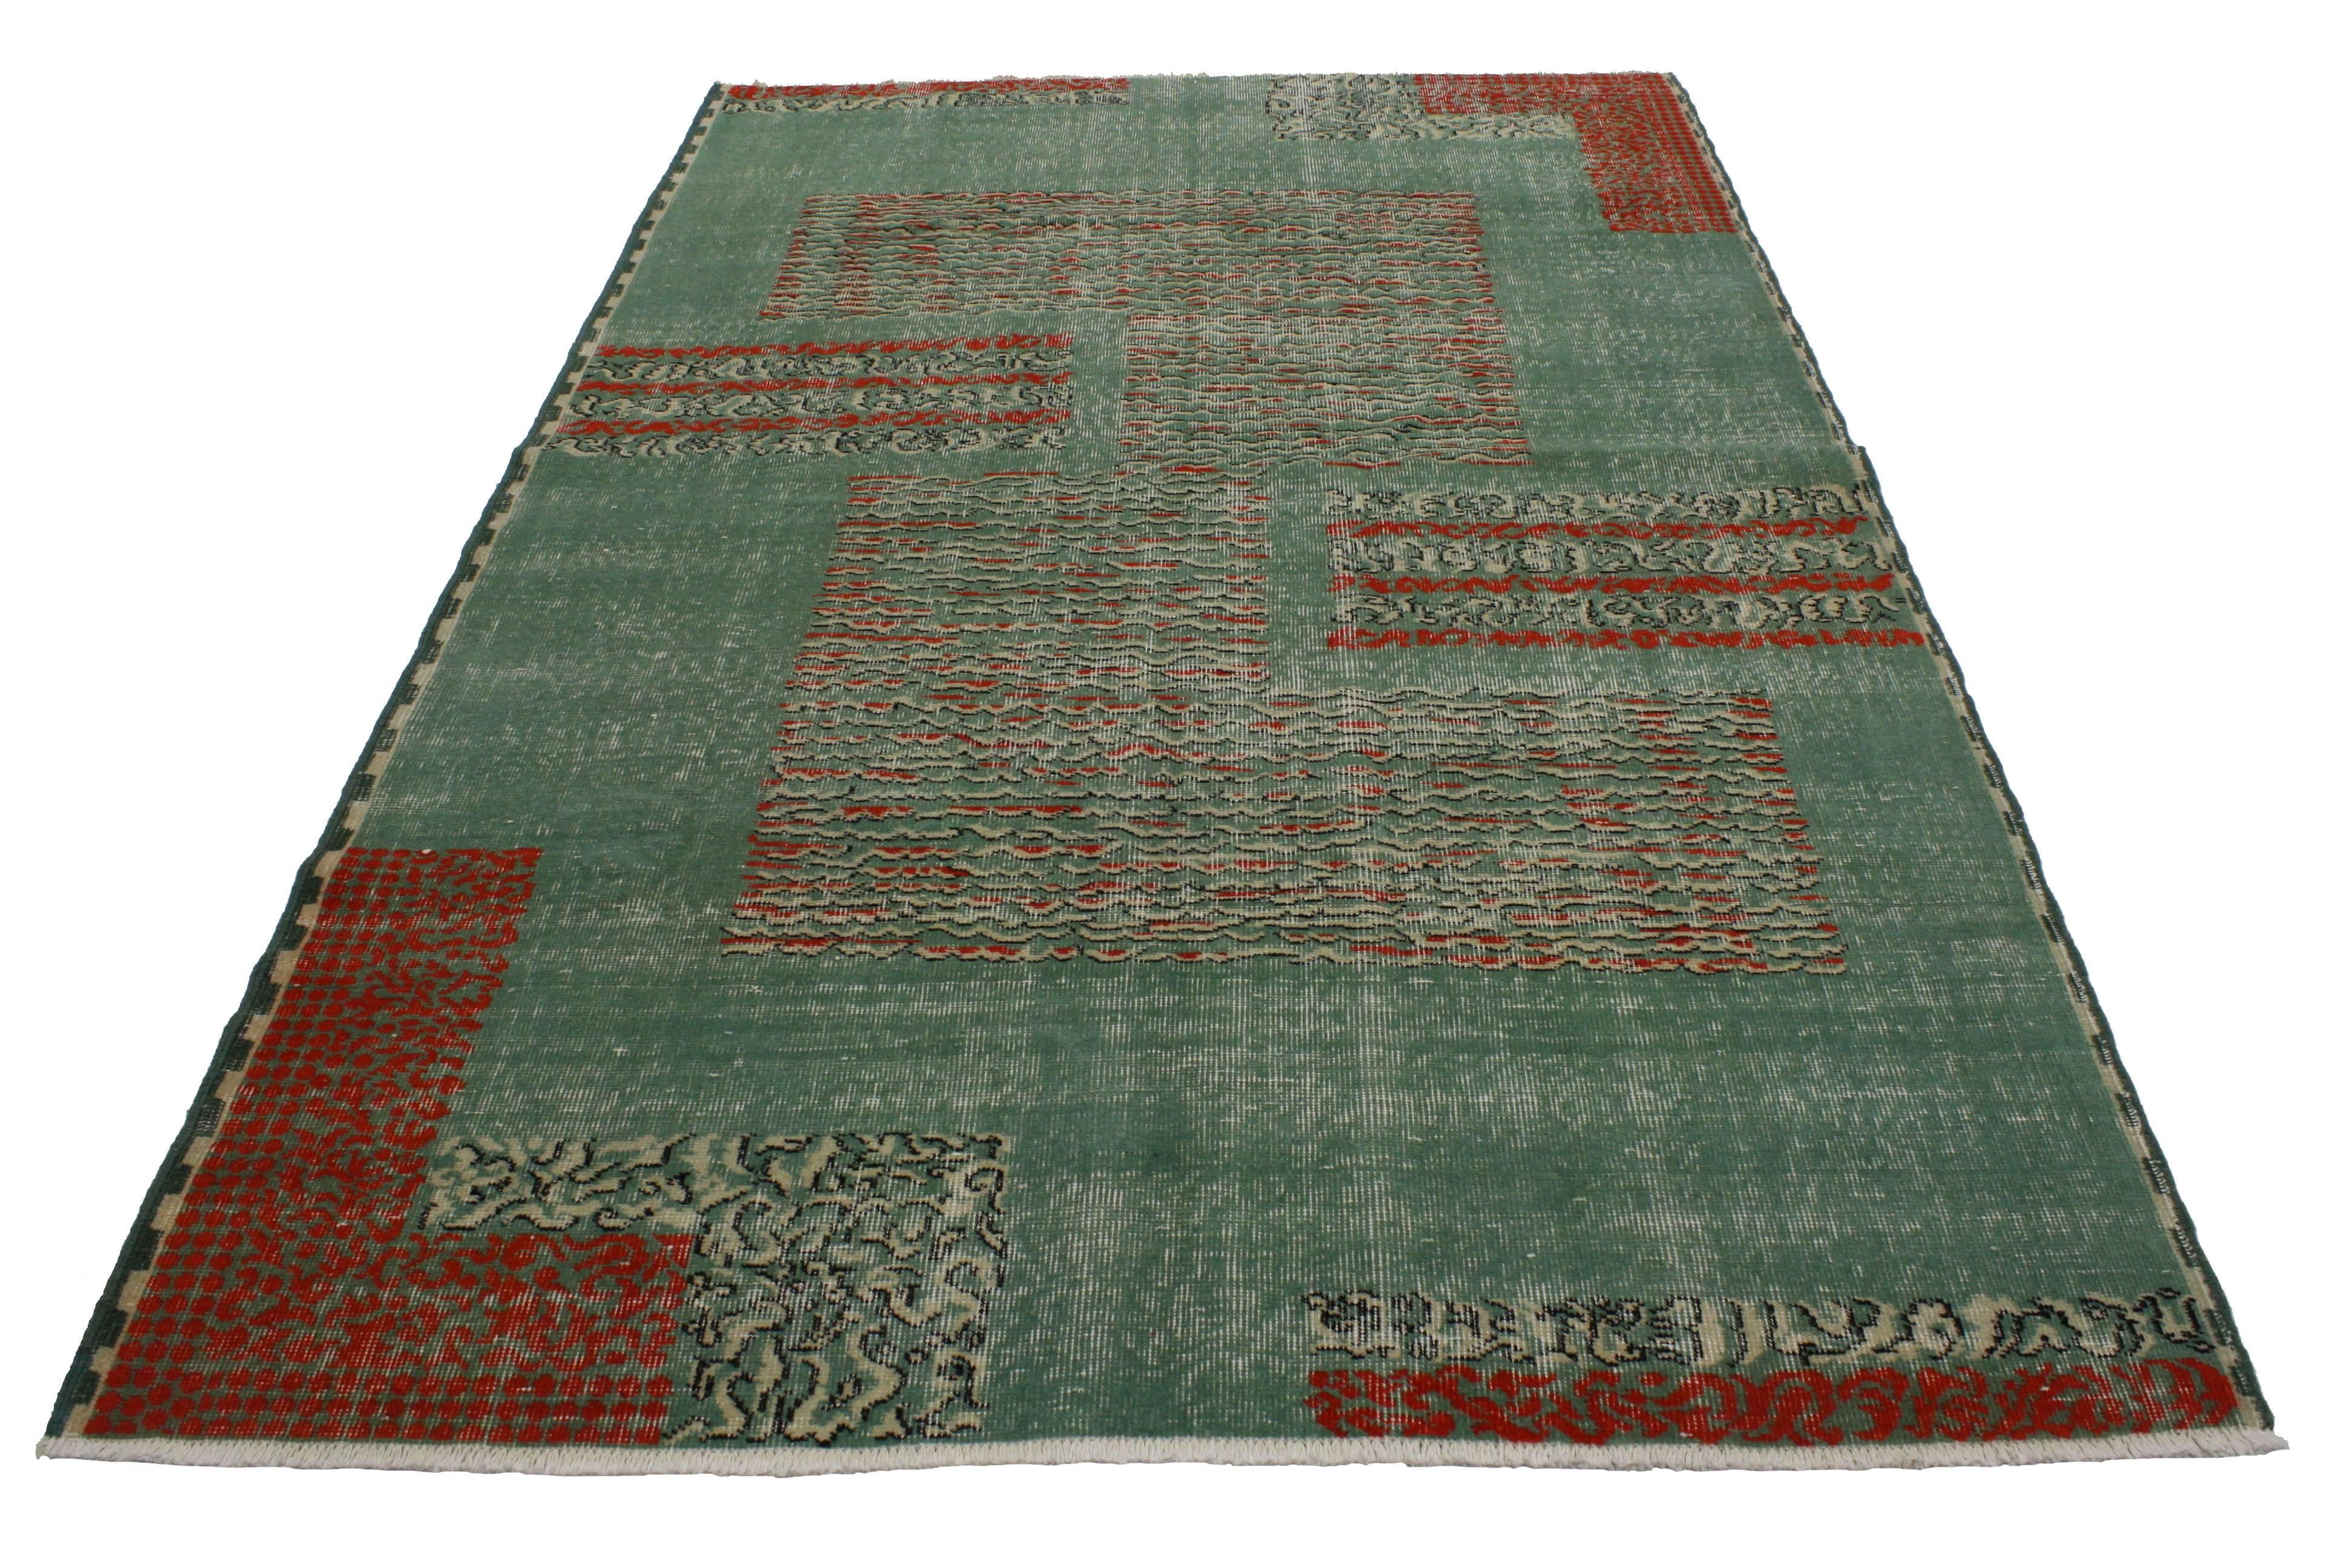 51653 Distressed Vintage Turkish Sivas Rug with Postmodern Industrial Bauhaus Style. In the style of the Turkish megastar, Zeki Muren, this distressed vintage Turkish Sivas rug with modern Industrial Art Deco style highlights a cool retro palette